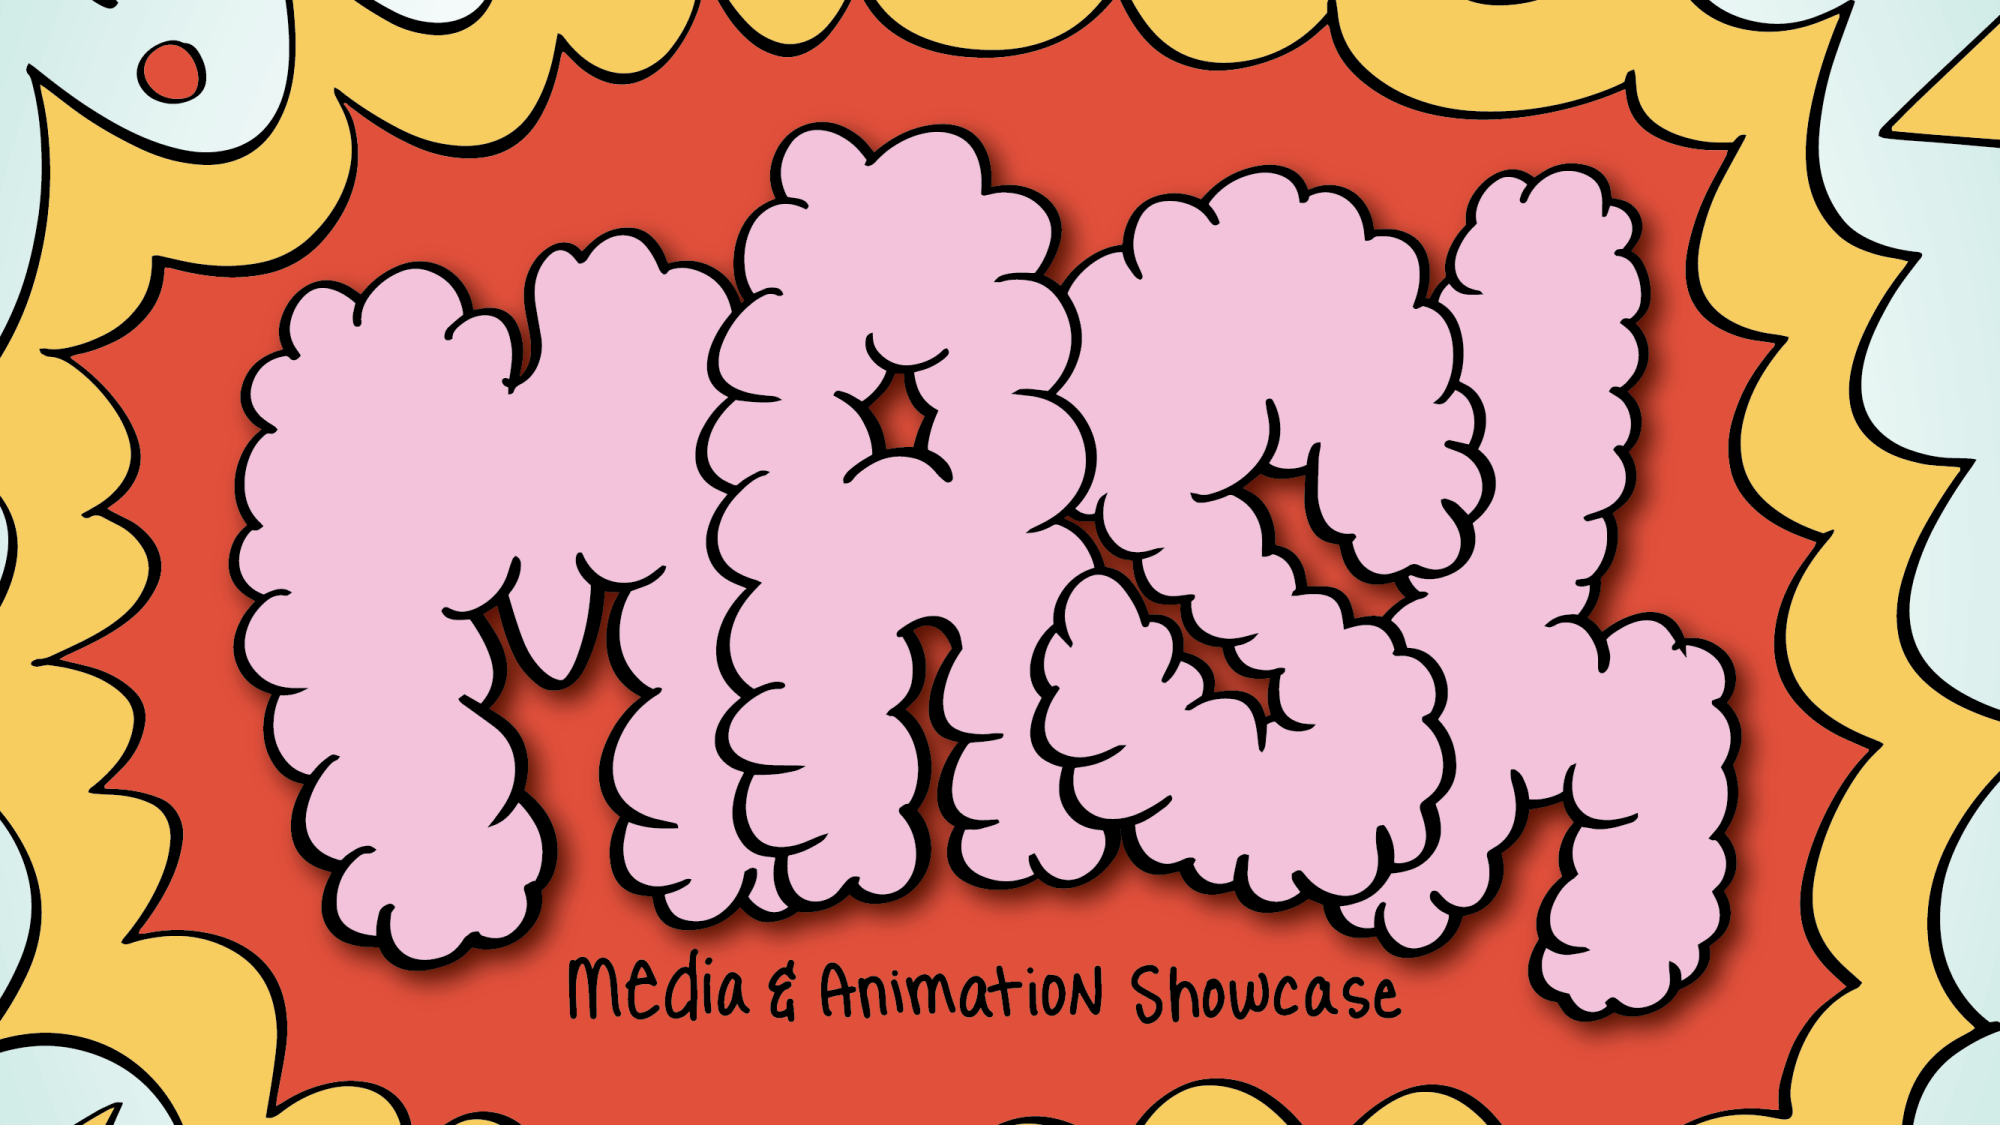 A vividly colored promo image featuring the caption "media & animation showcase" in playful, bubble fonts against an exciting comic book-like explosion backdrop.